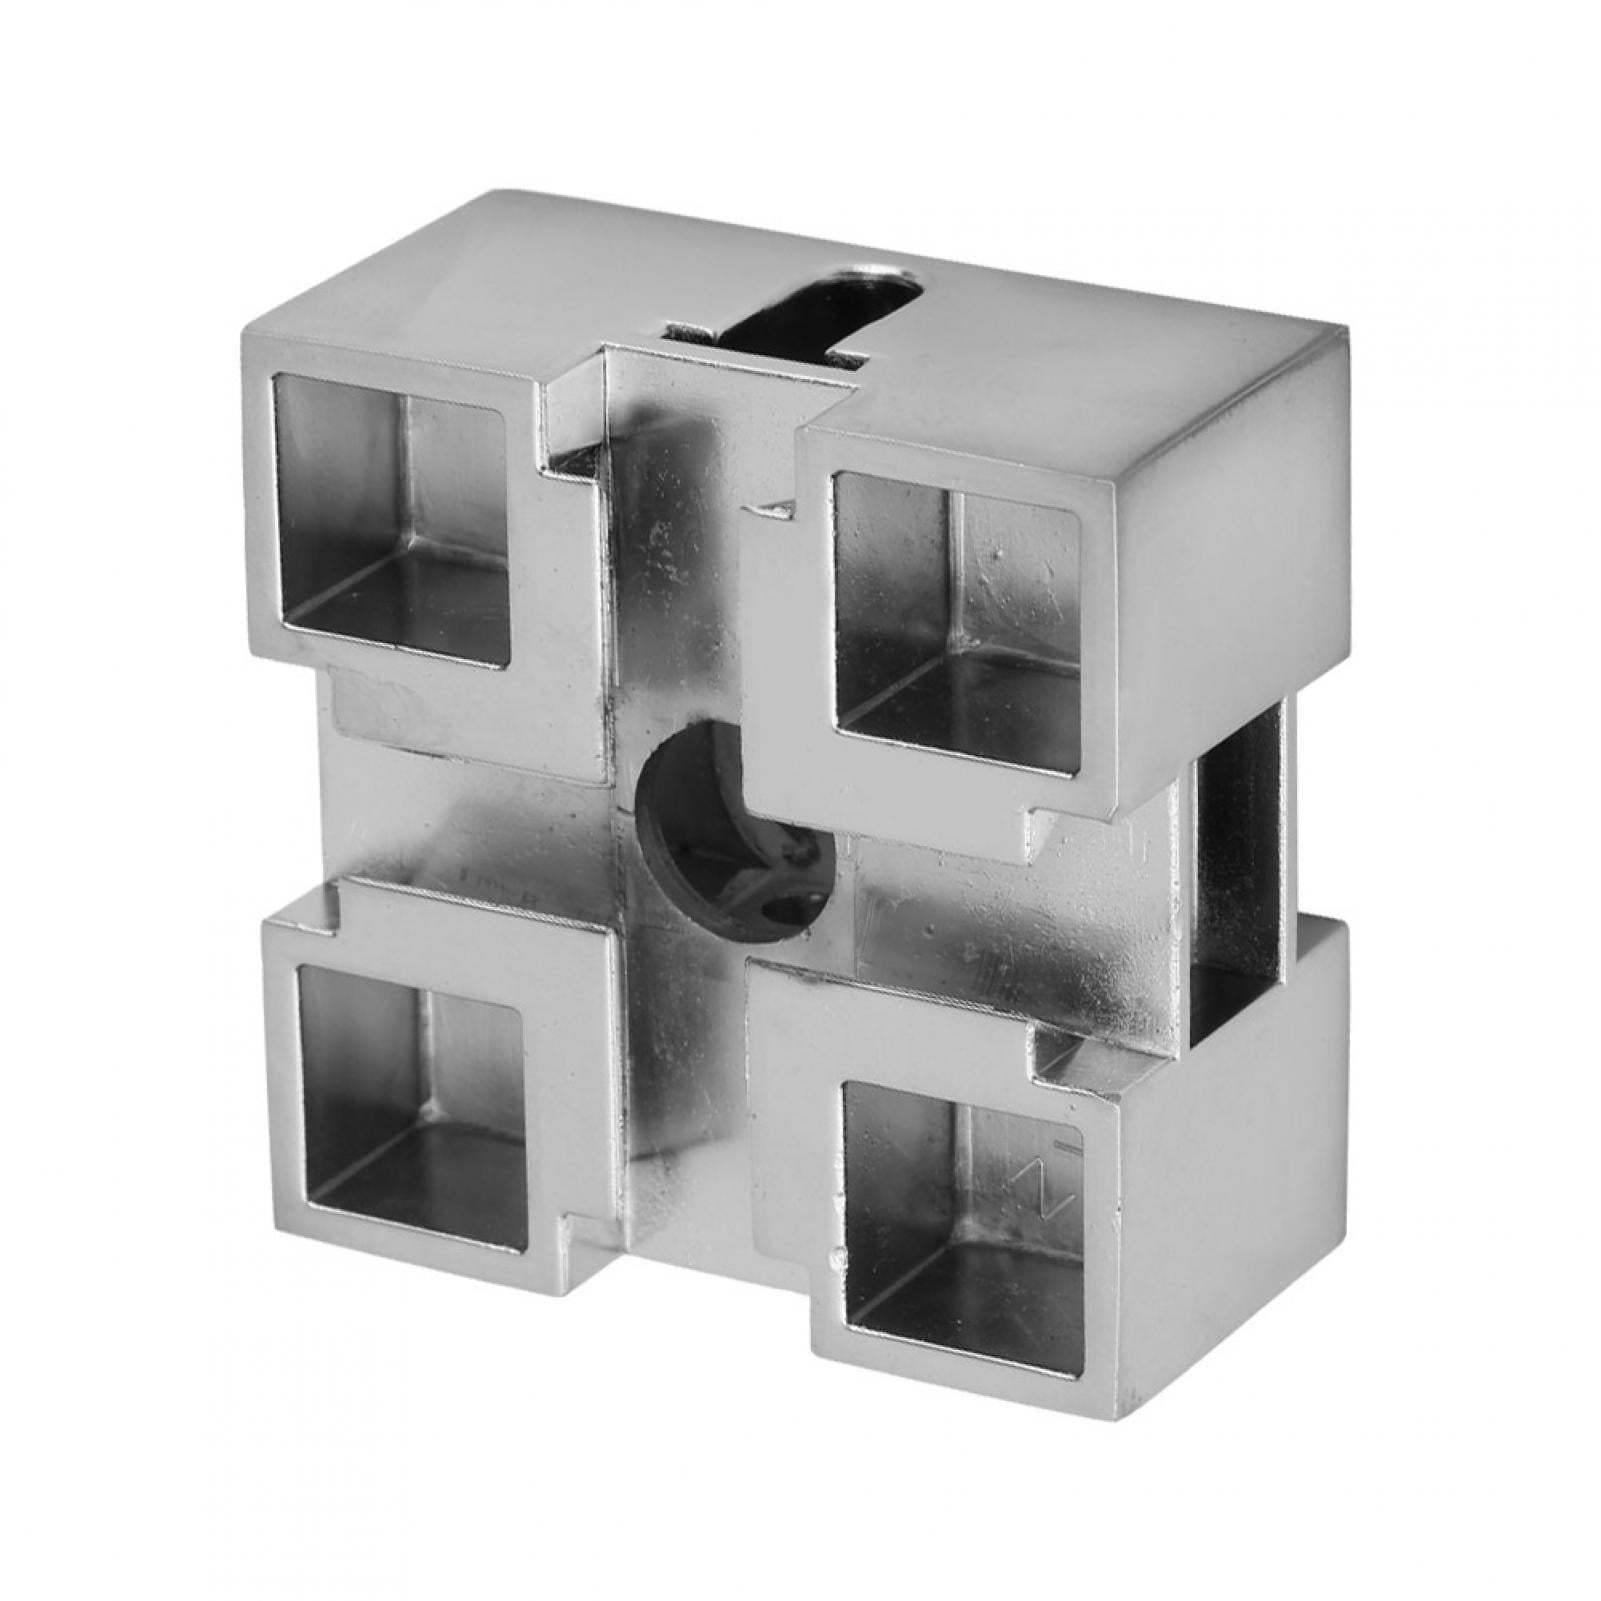 Metal Central Block Stainless Steel Heighten Block Riser for Professional Use Machine Tool